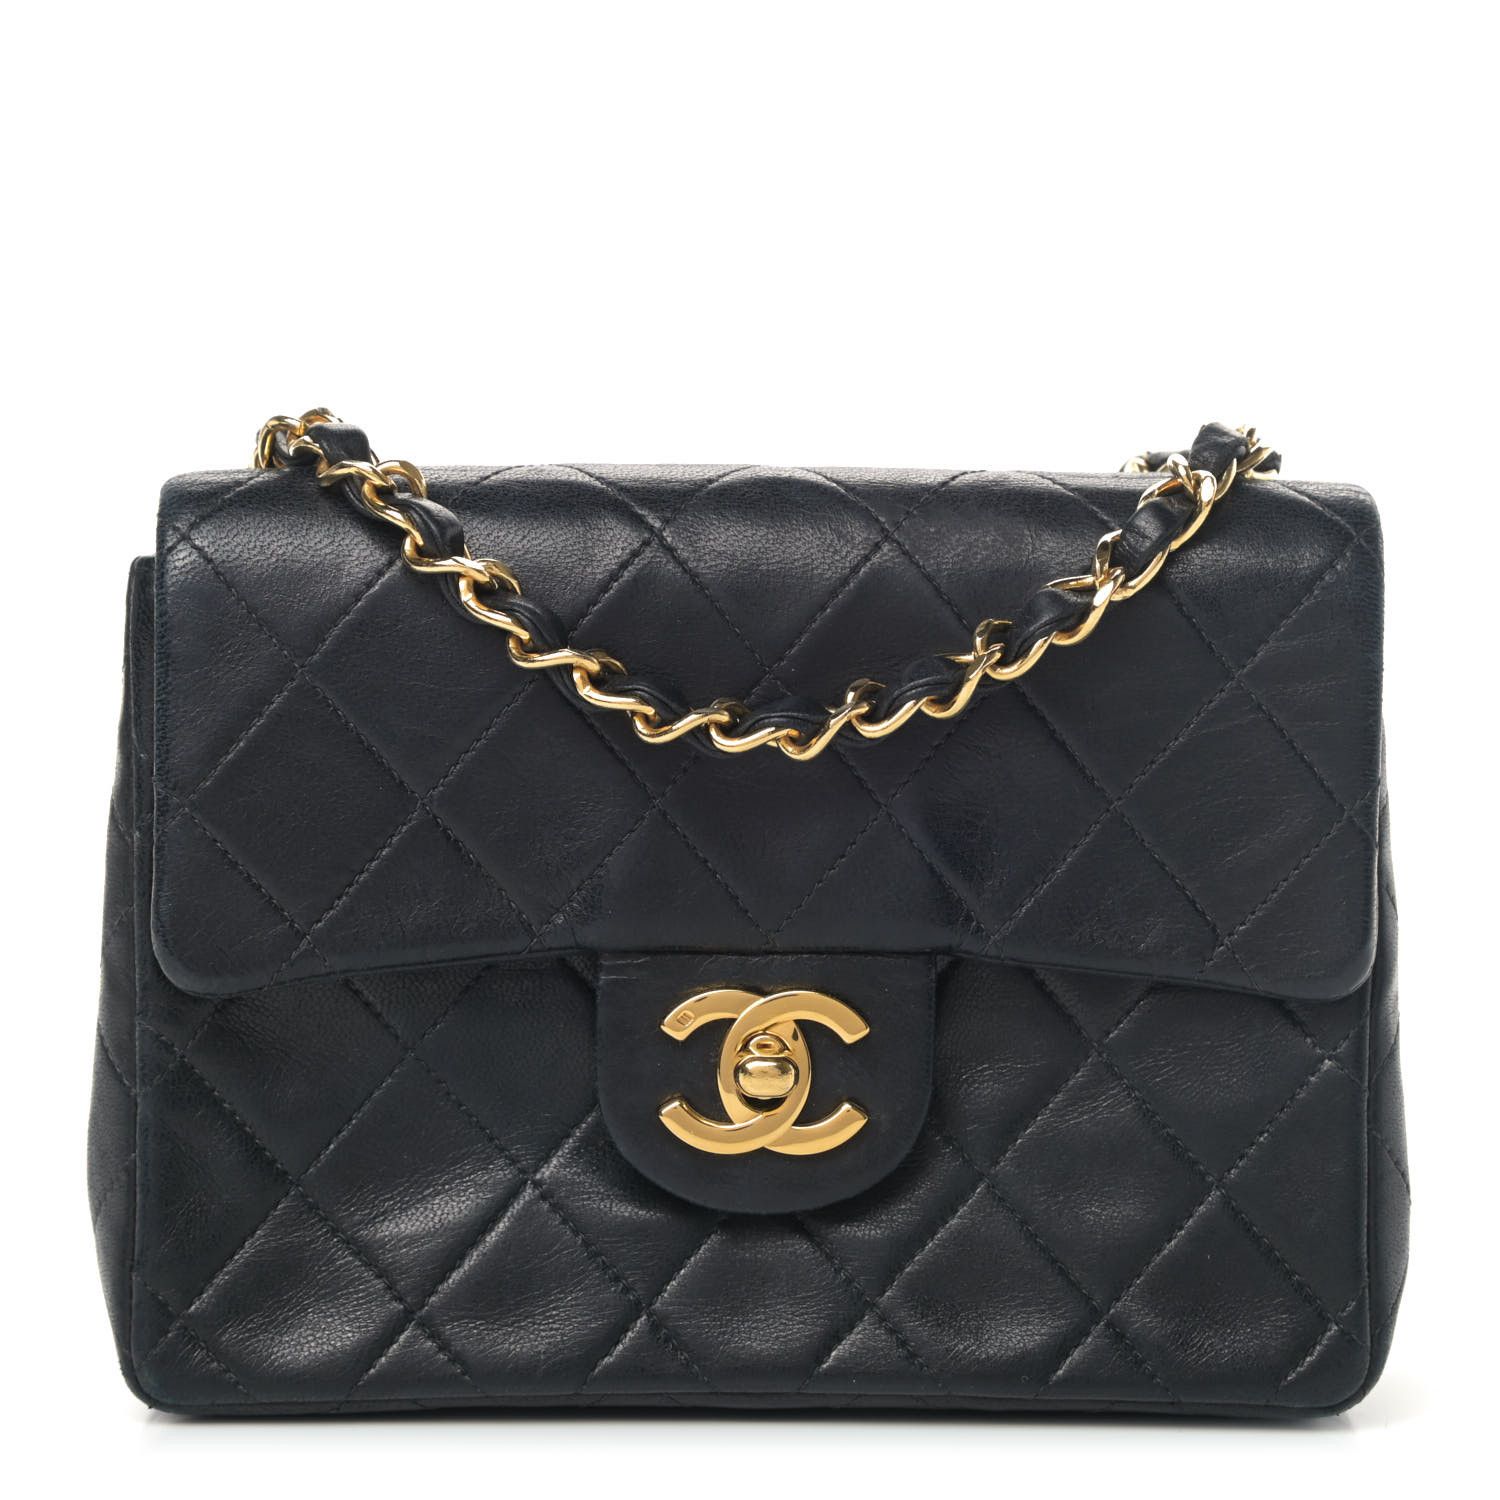 CHANEL

Lambskin Quilted Mini Square Flap Bag Black | Fashionphile